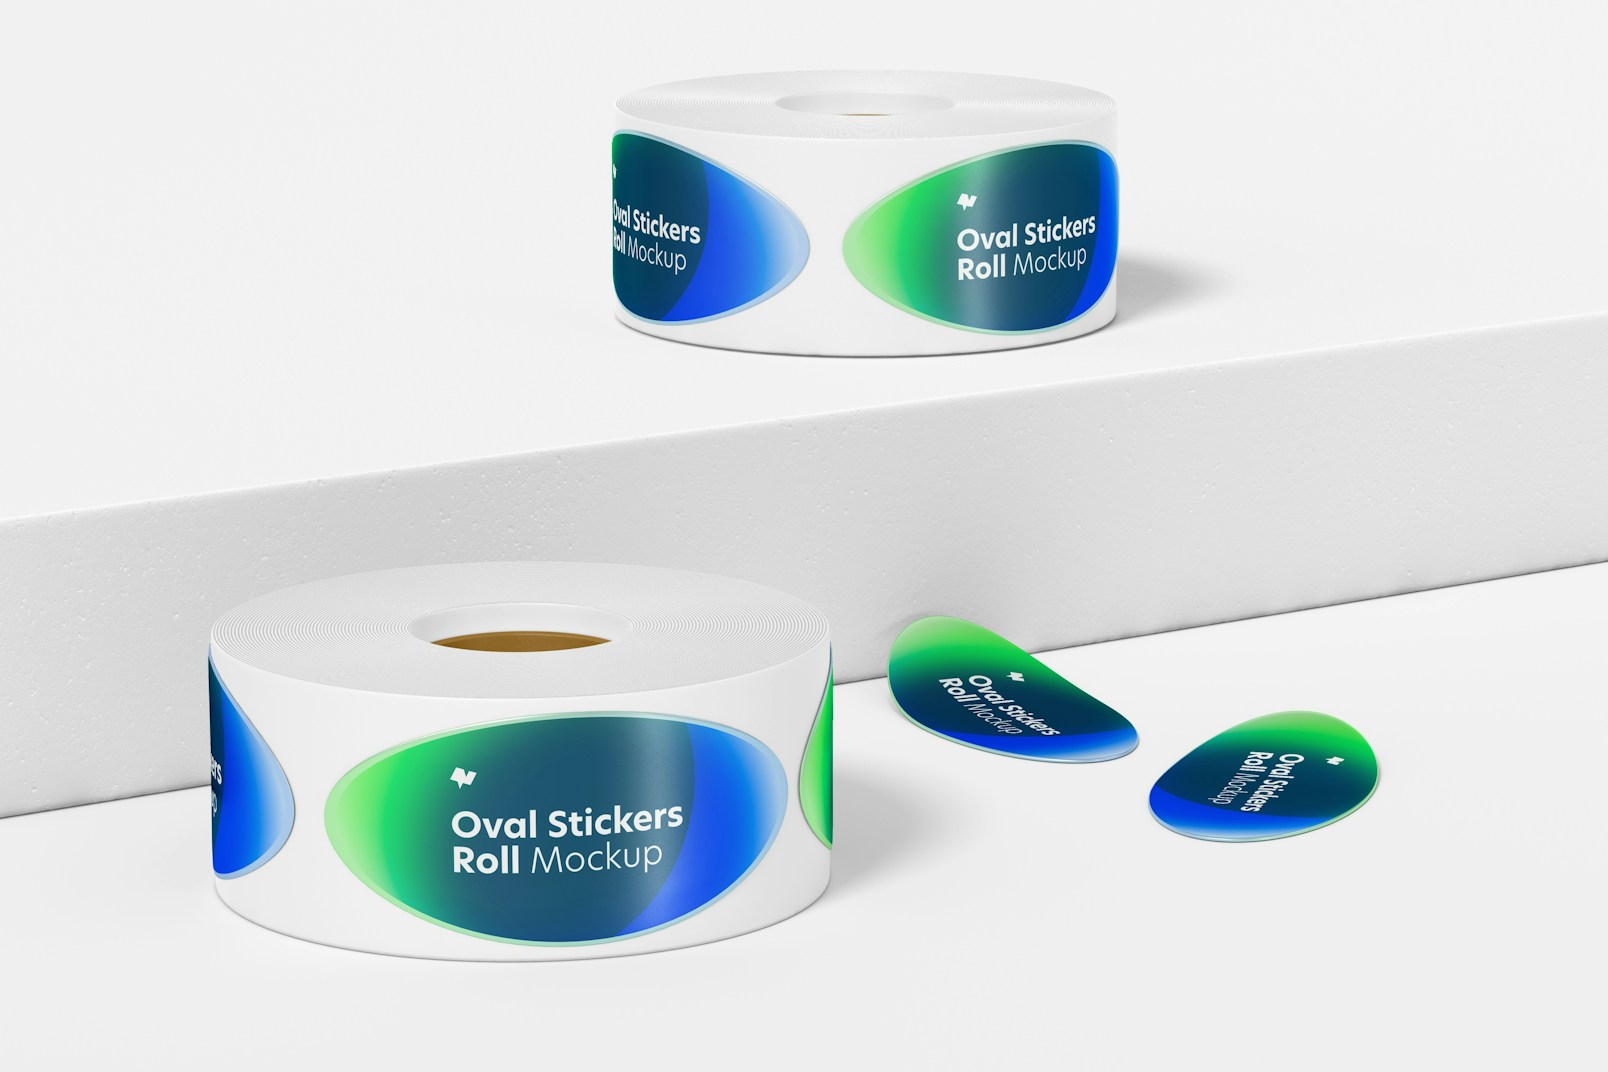 Oval Stickers Rolls Mockup, Front View